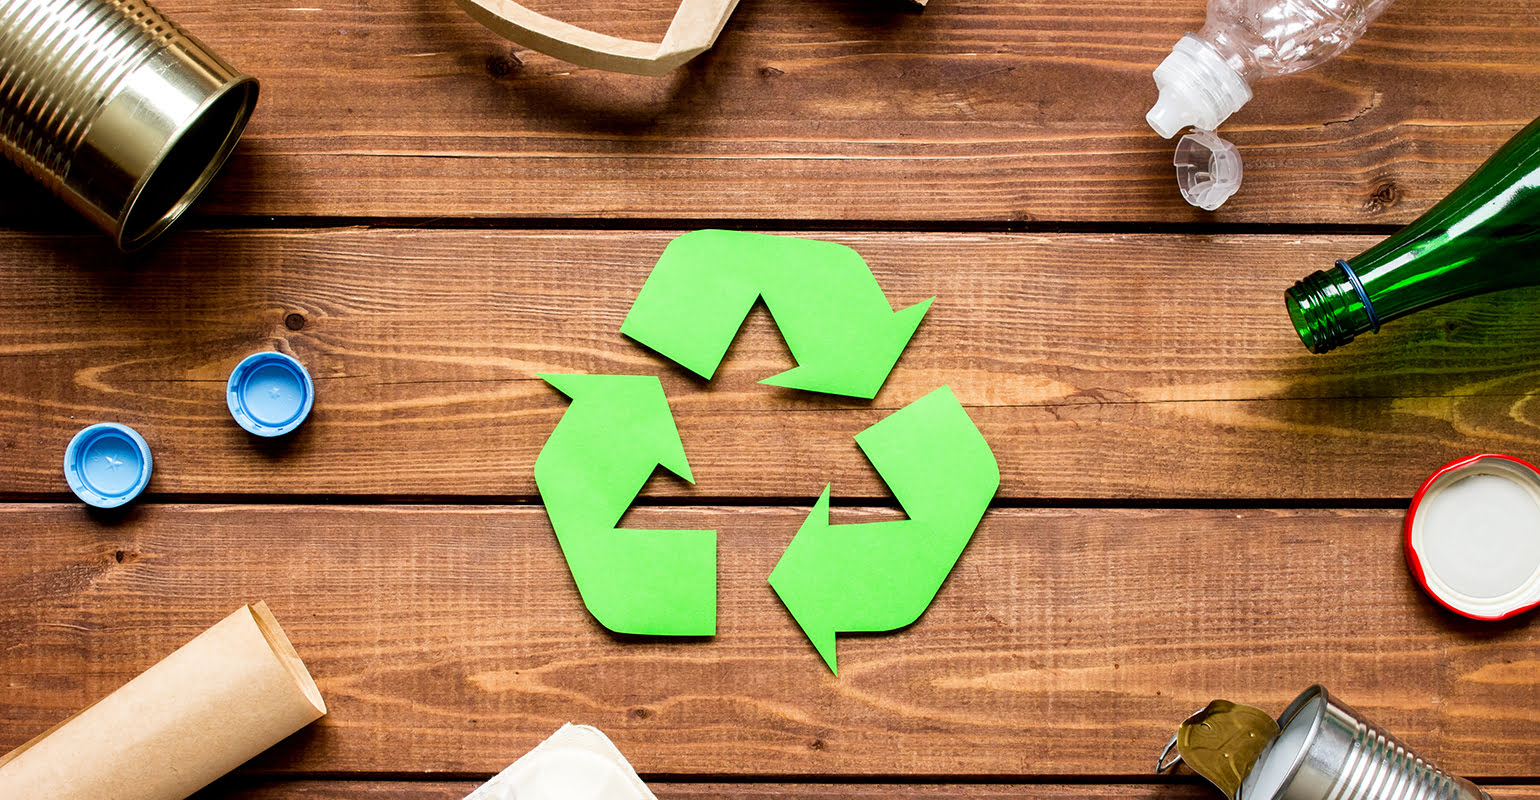 Why is sustainable packaging important?